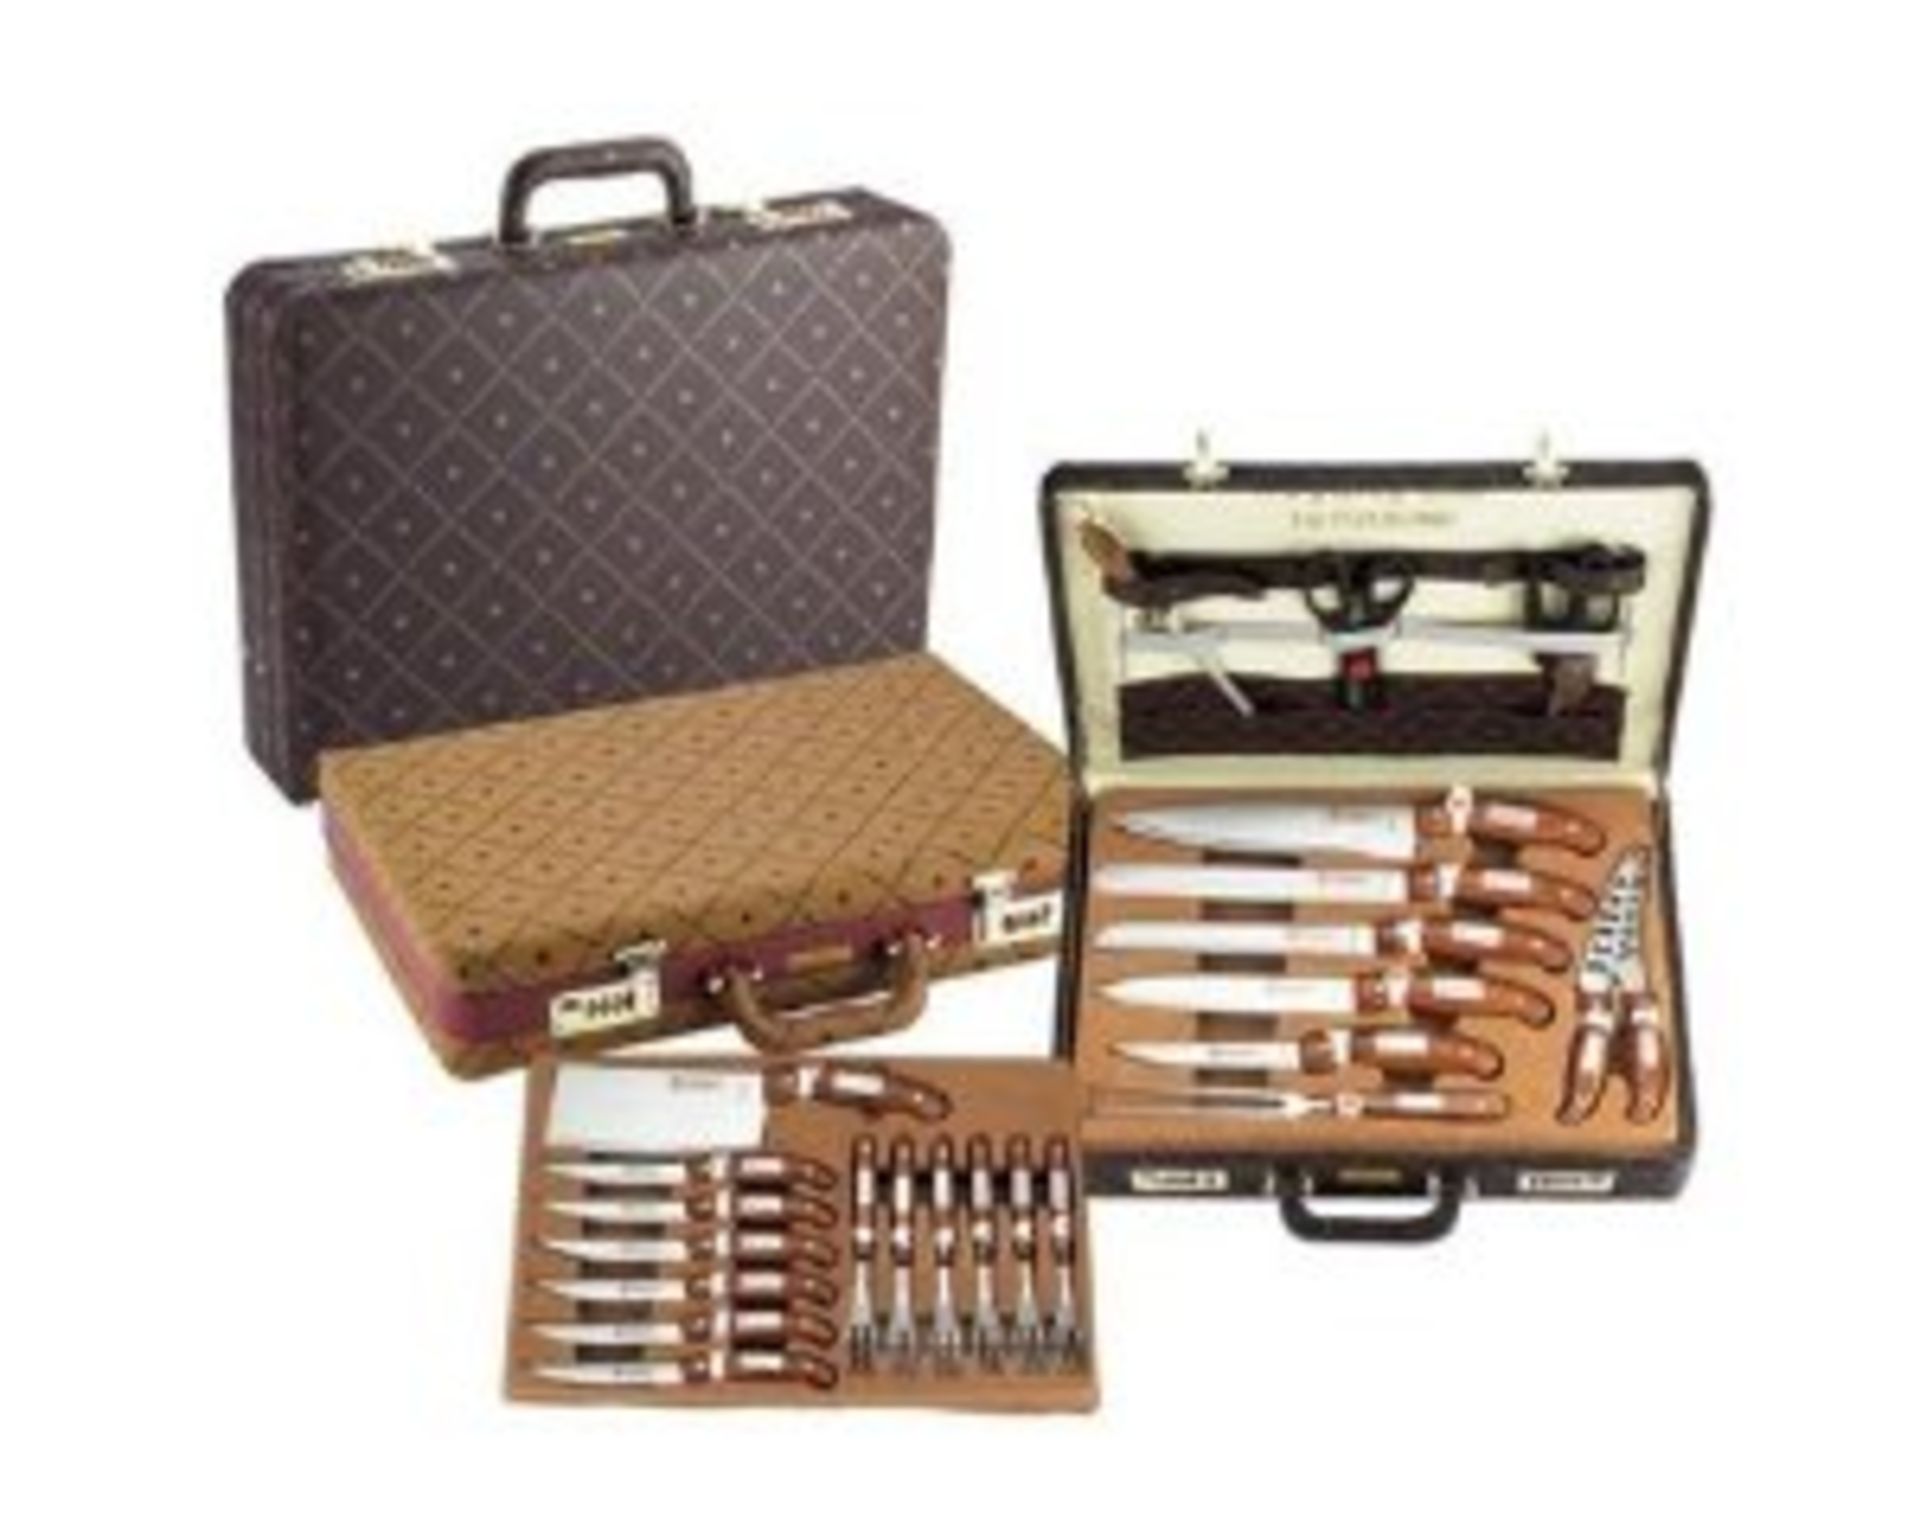 V *TRADE QTY* Brand New 25pc Profesional Knife & Cutlery Set in Fitted Case RRP 390 euros (Item